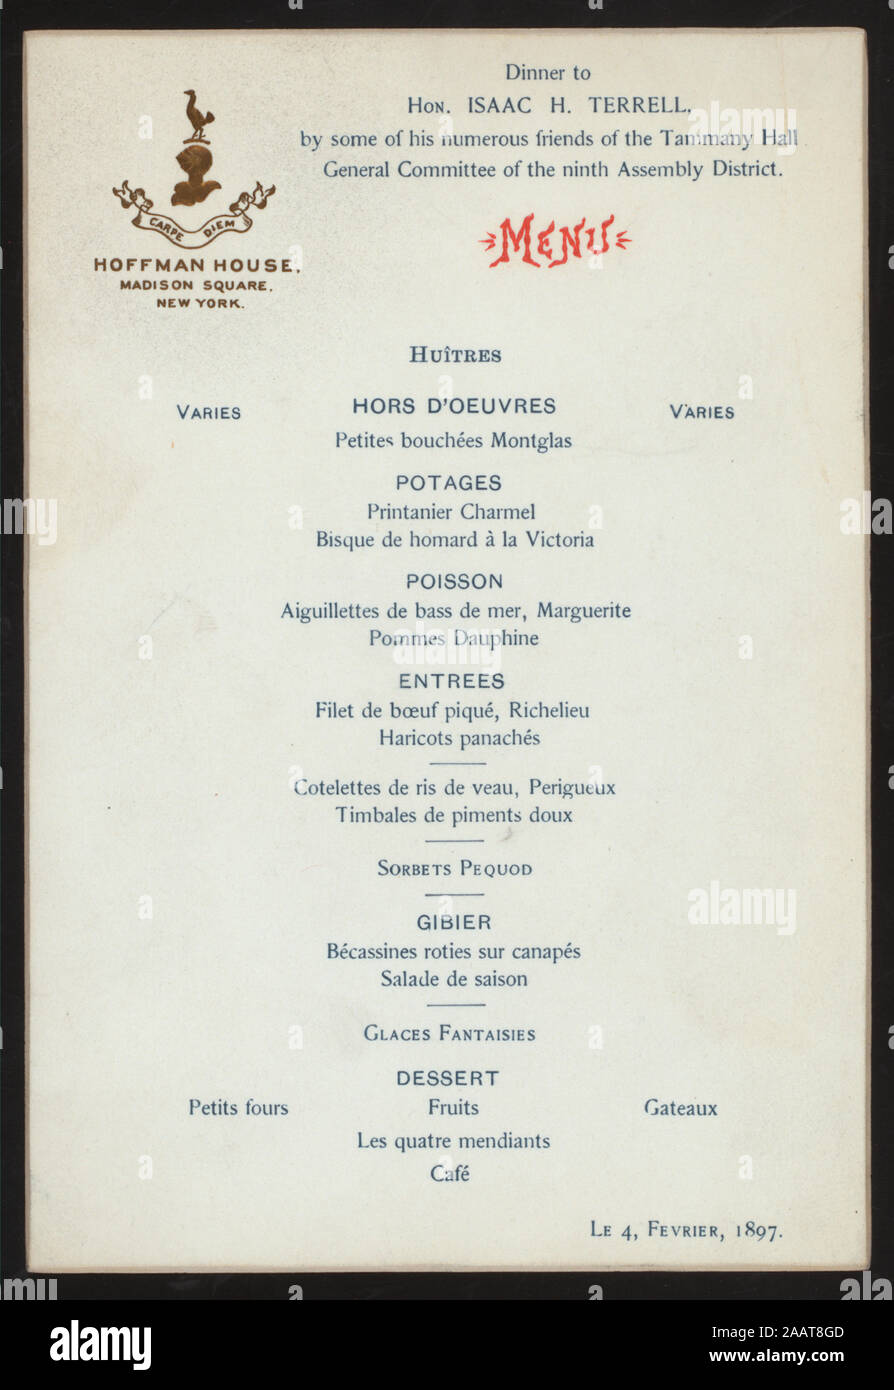 DINNER TO HONISAAC H TERRELL (held by) TAMMANY HALL GENERAL COMMITTEE OF THE NINTH ASSEMBLY DISTRICT (at) HOFFMAN HOUSE,NEW YORK, NY (HOTEL;) MENU IN FRENCH; DINNER TO HON.ISAAC H. TERRELL [held by] TAMMANY HALL GENERAL COMMITTEE OF THE NINTH ASSEMBLY DISTRICT [at] HOFFMAN HOUSE,NEW YORK, NY (HOTEL;) Stock Photo